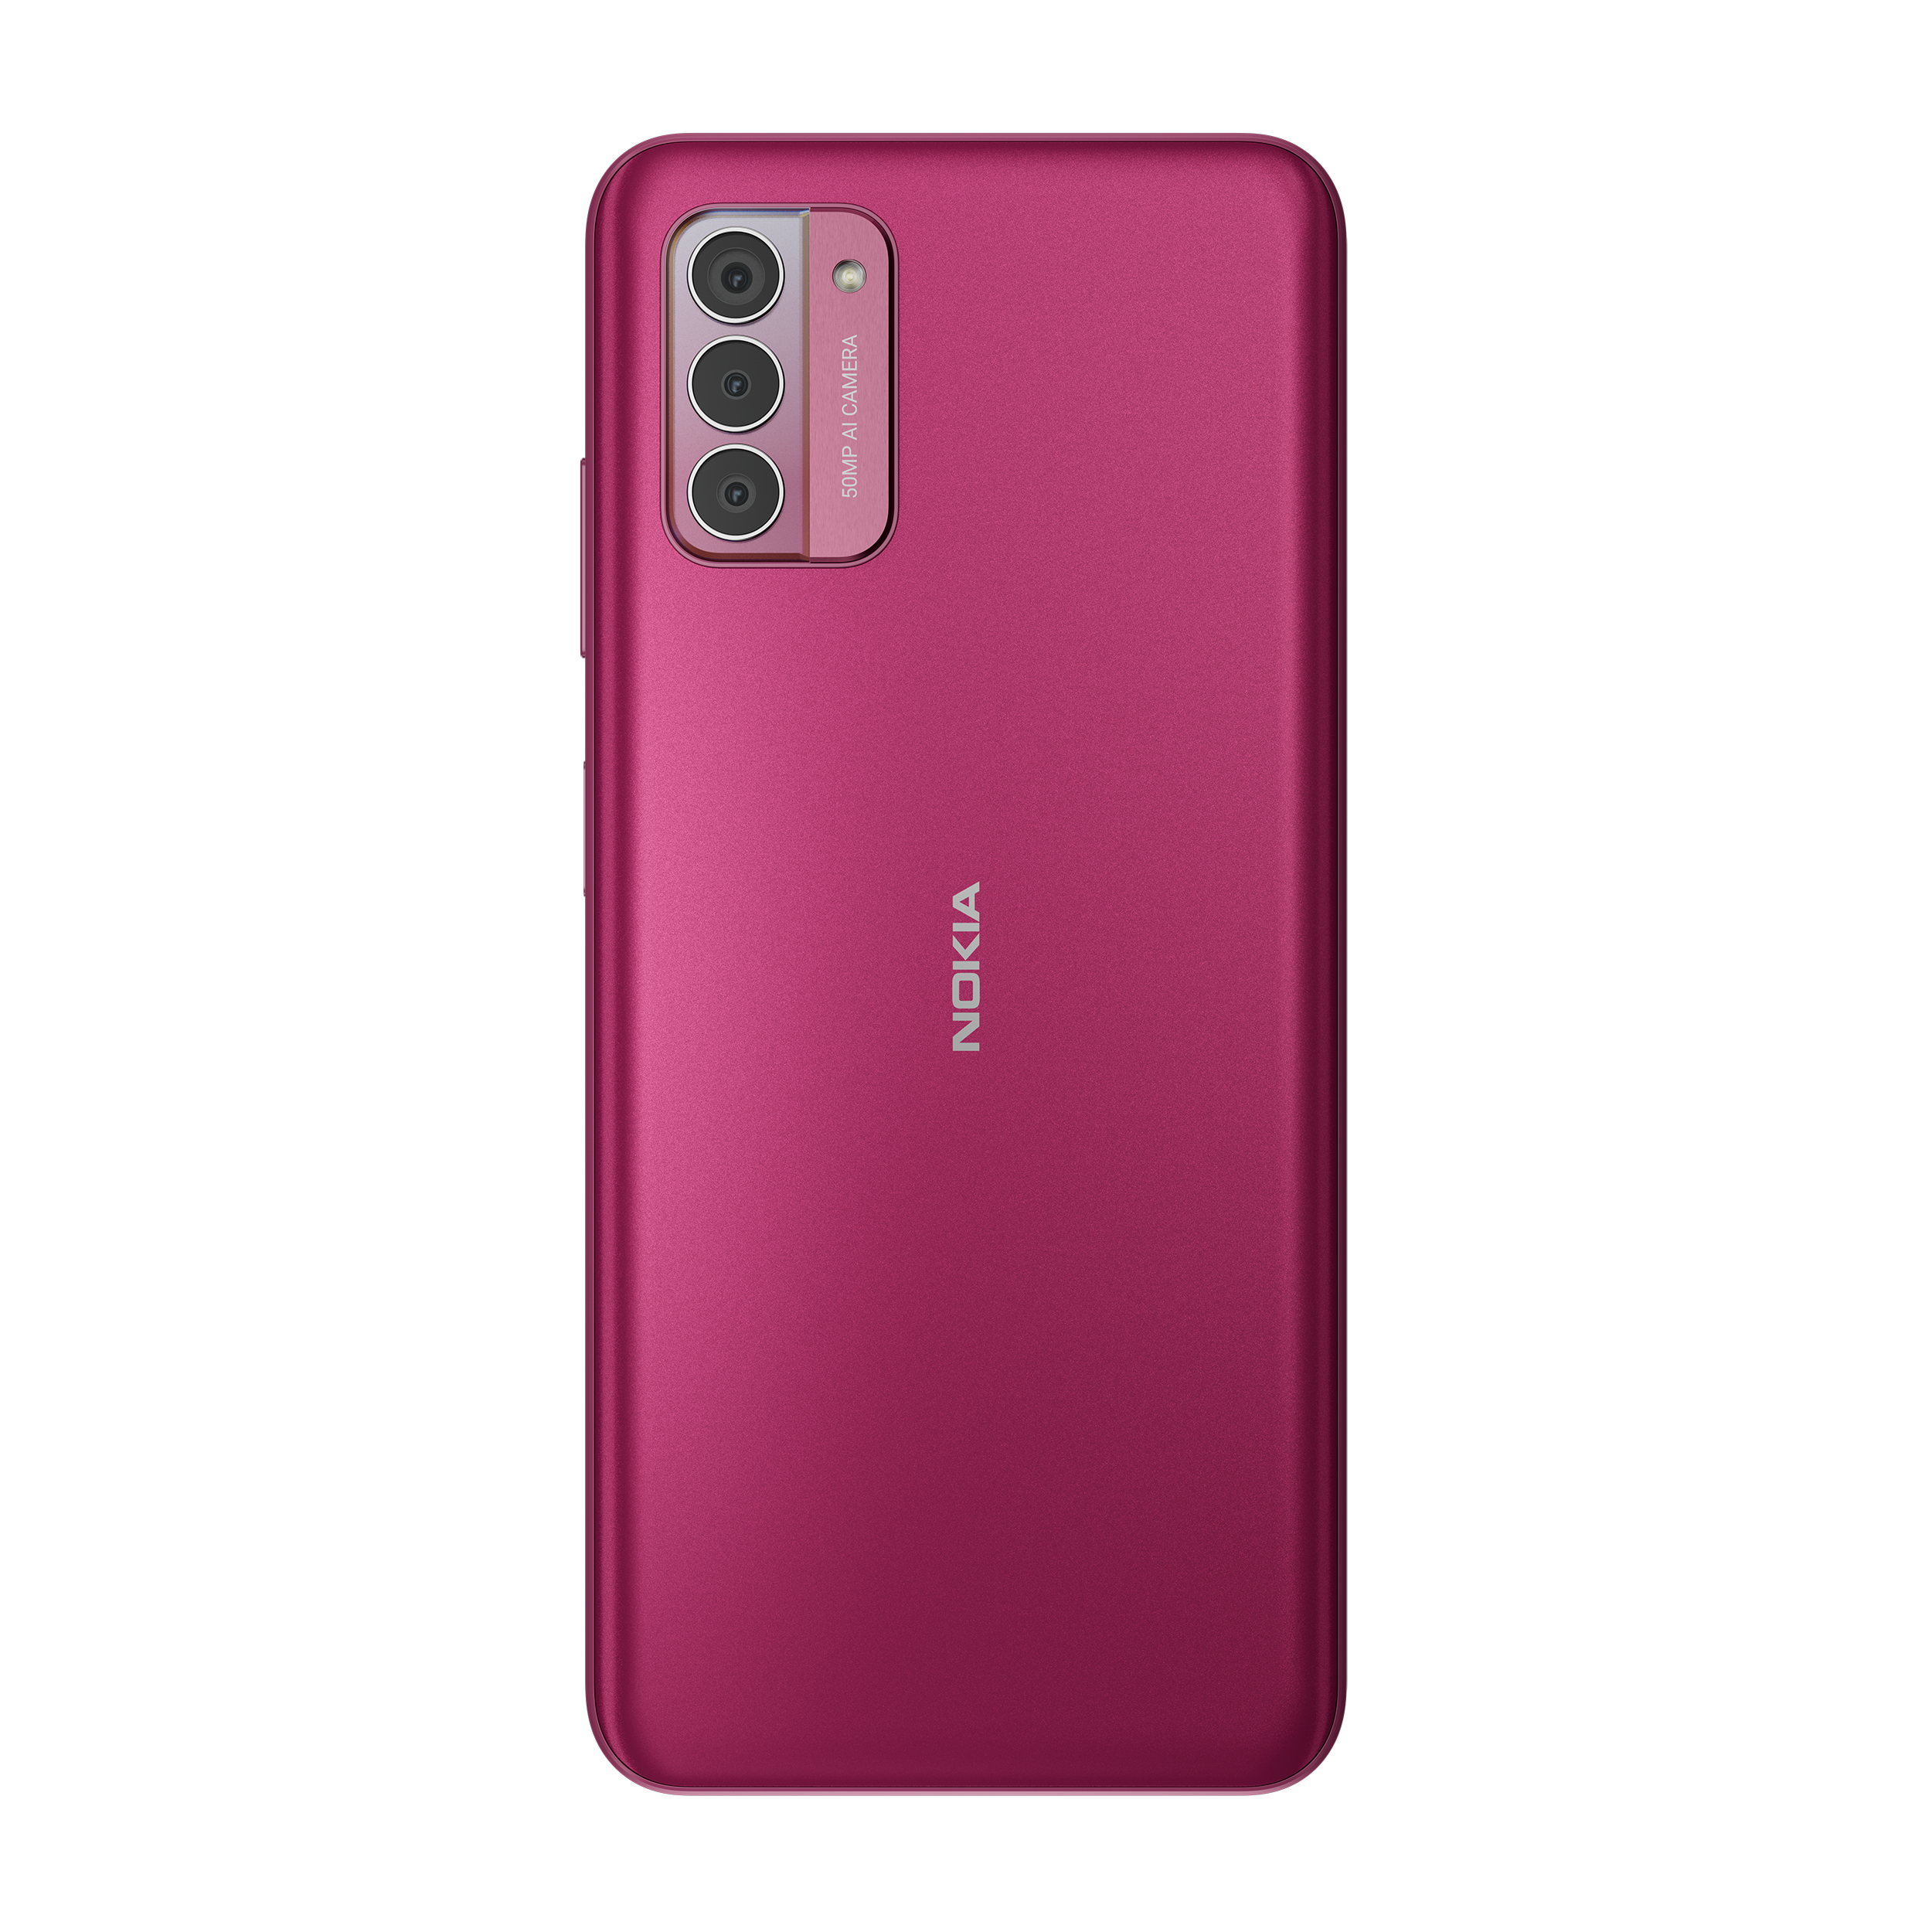 Nokia G42 5G Dual-Sim 6/128 GB so pink Android 13.0 Smartphone ++ Cyberport